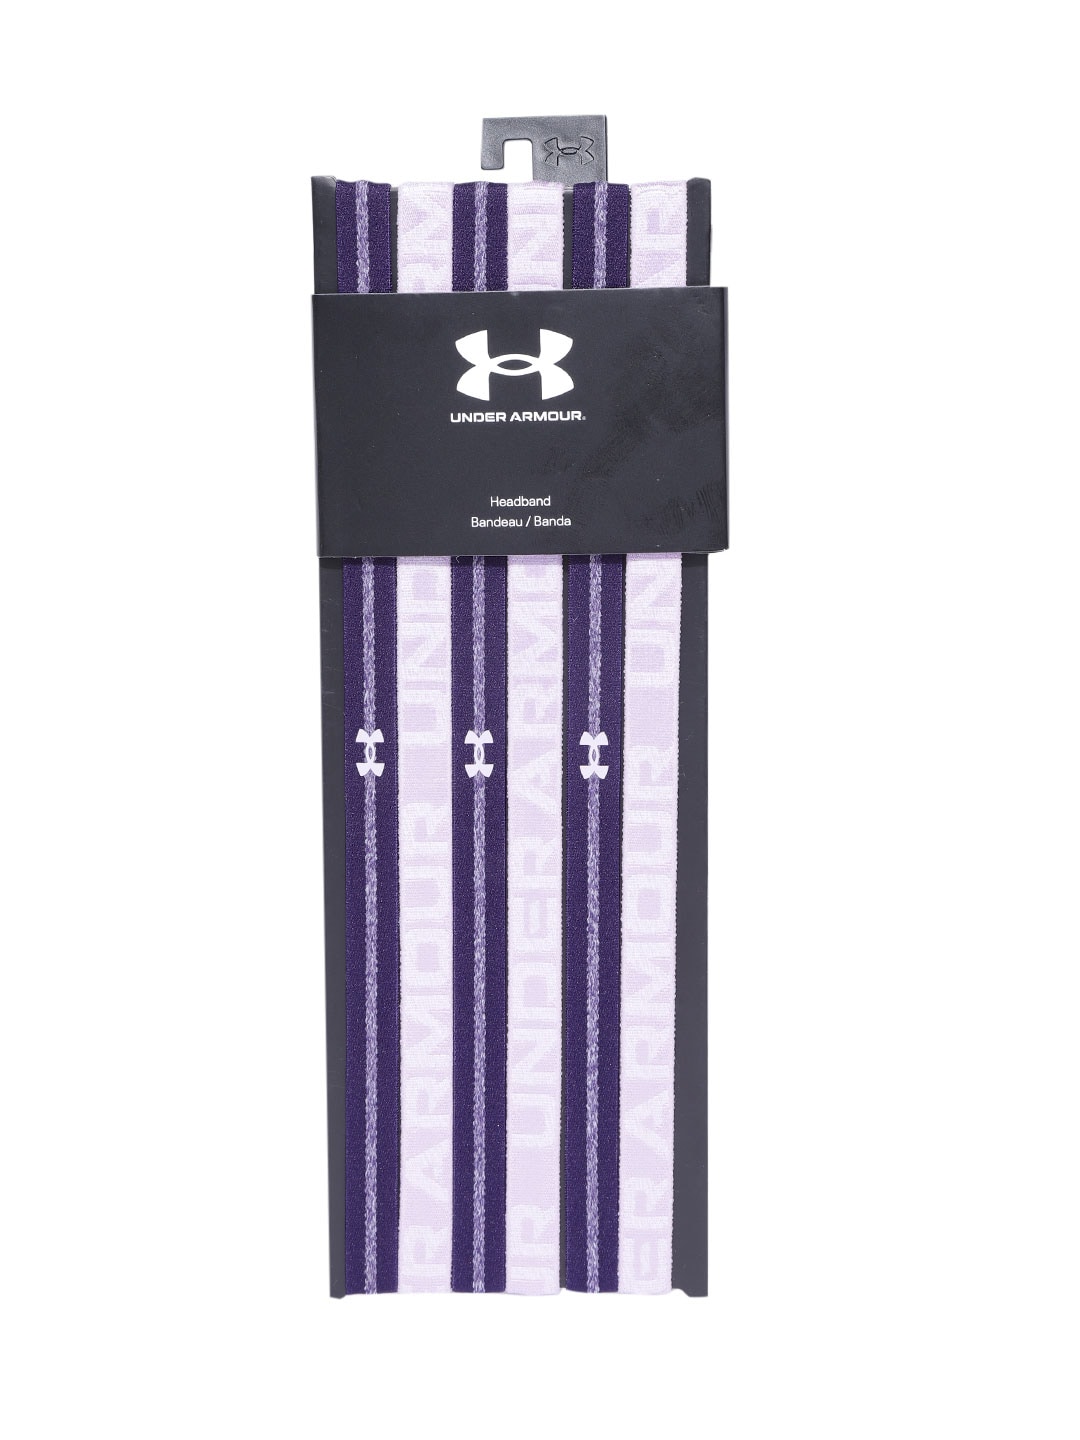 UNDER ARMOUR Women Pack of 6 HTR Mini Headband Price in India